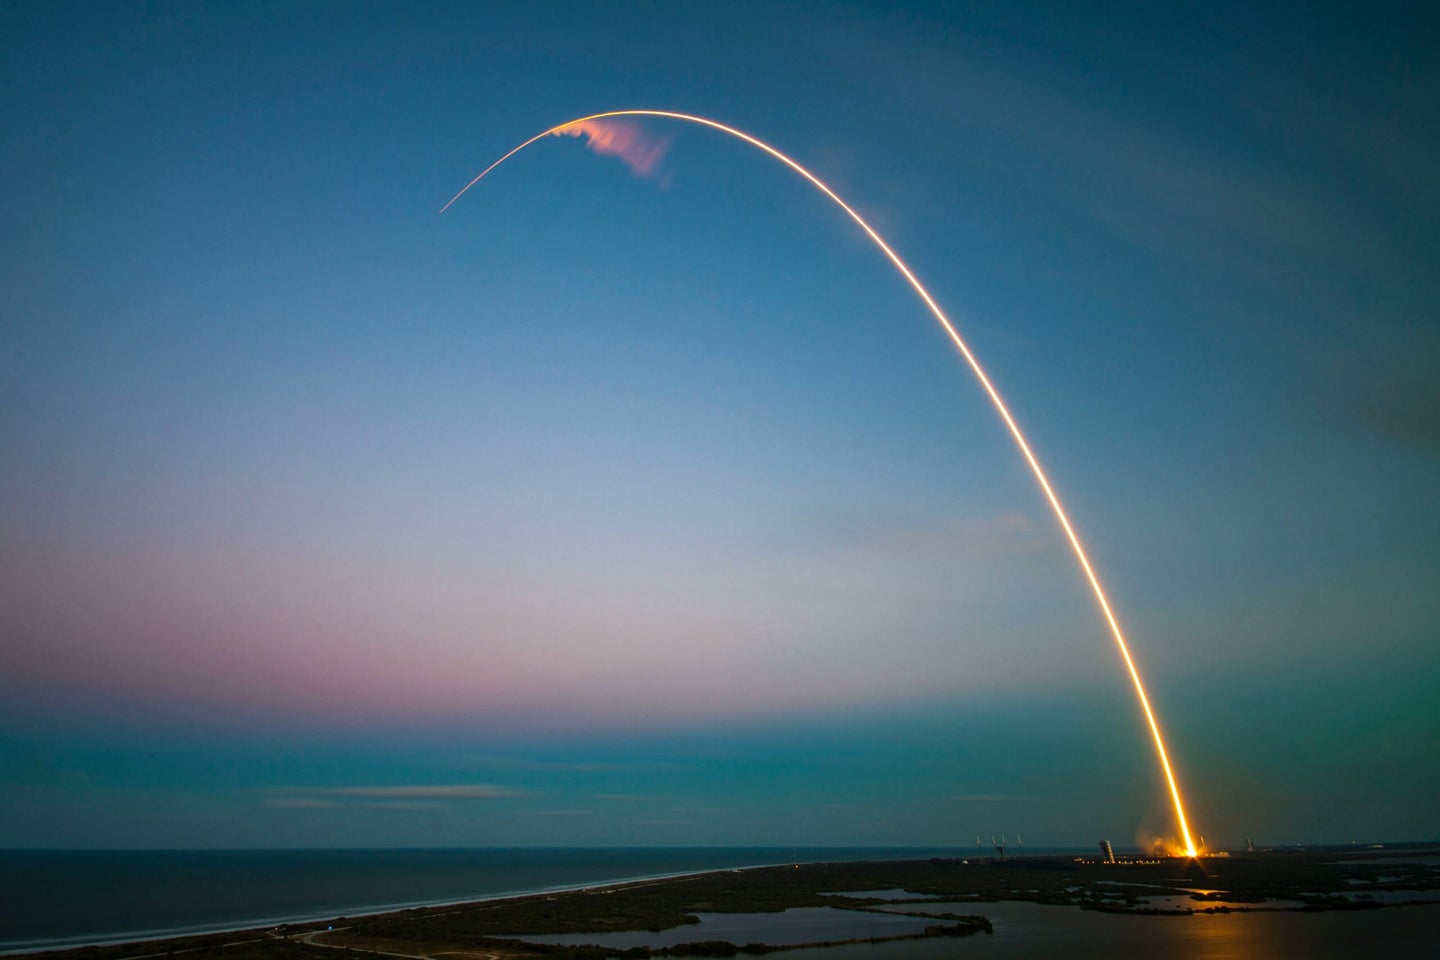 A SpaceX rocket seen launching from Cape Canaveral in Florida.